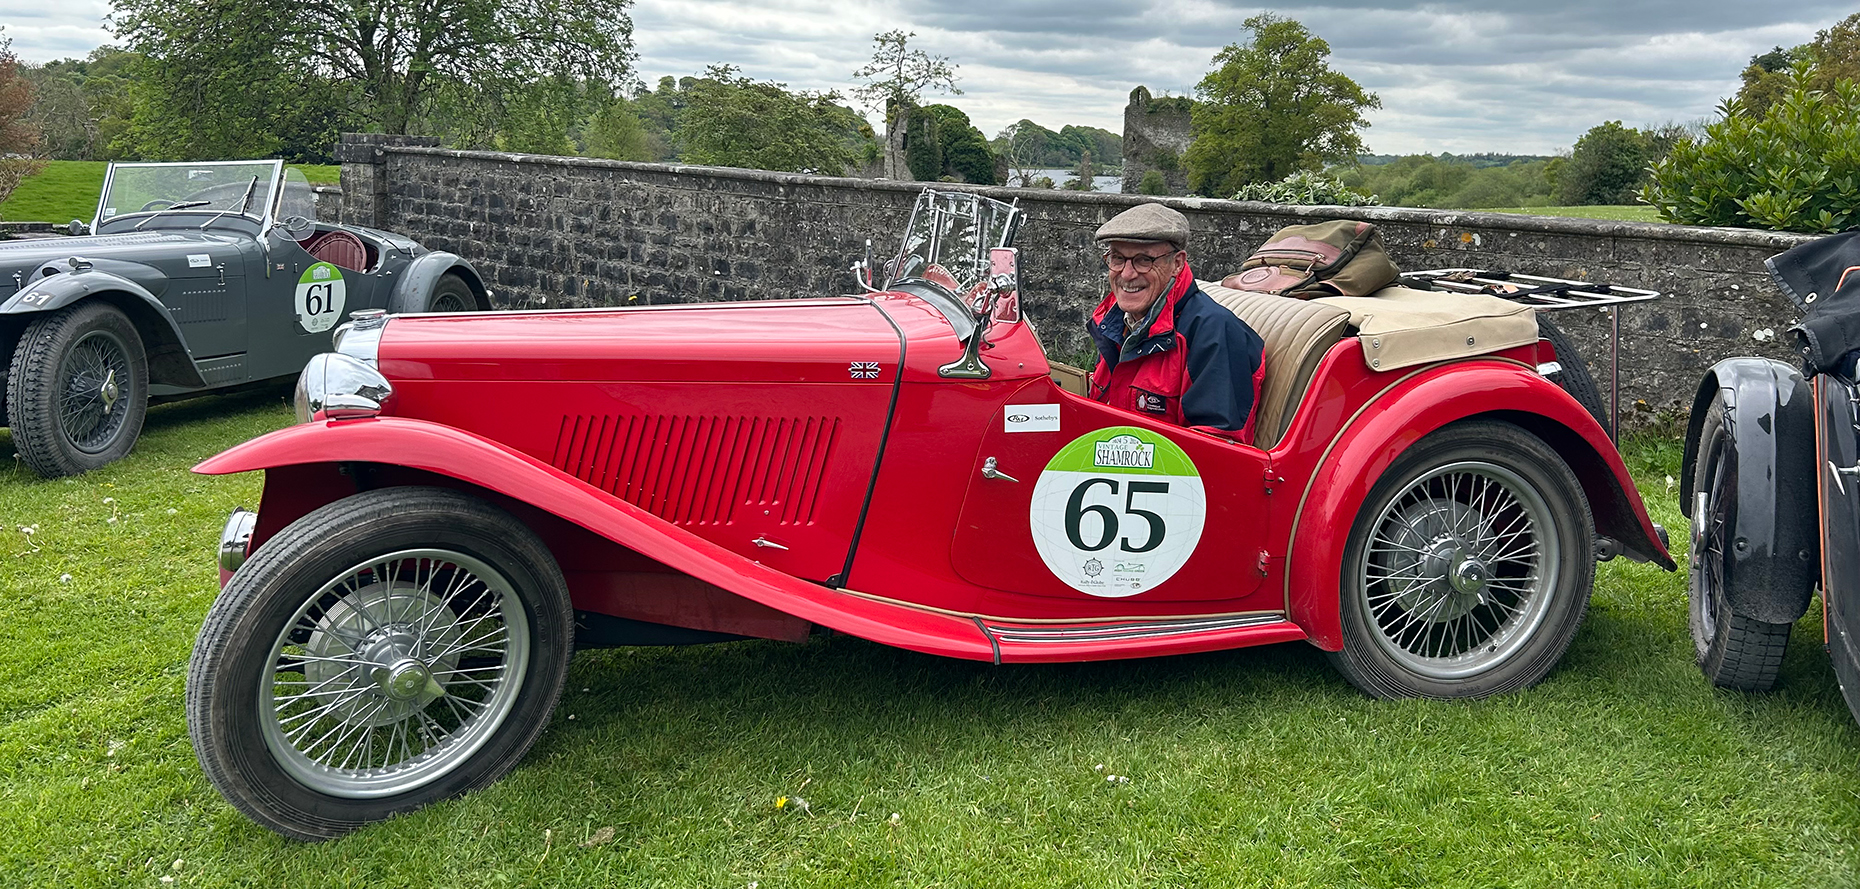 Jim in the MG